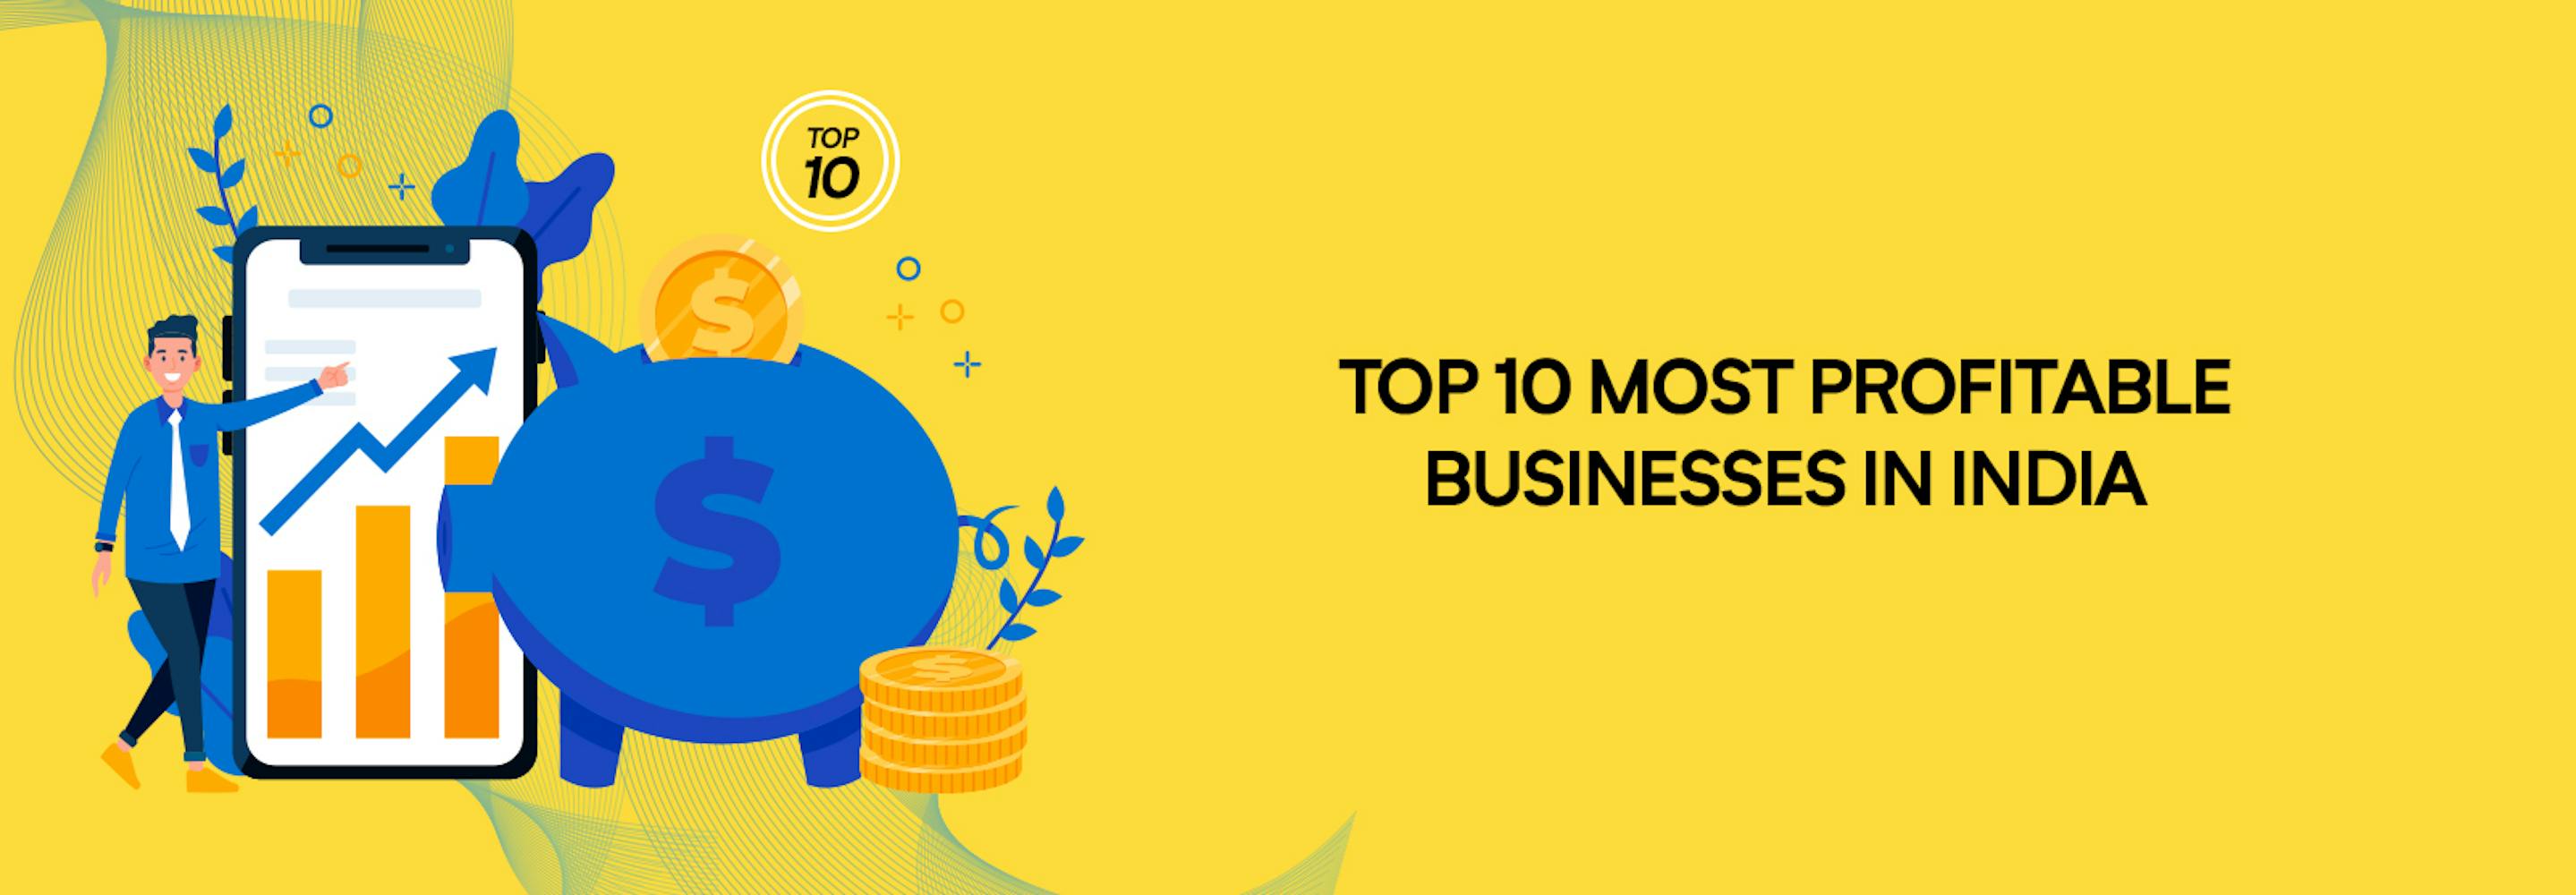 Top 10 Most Profitable Businesses in India